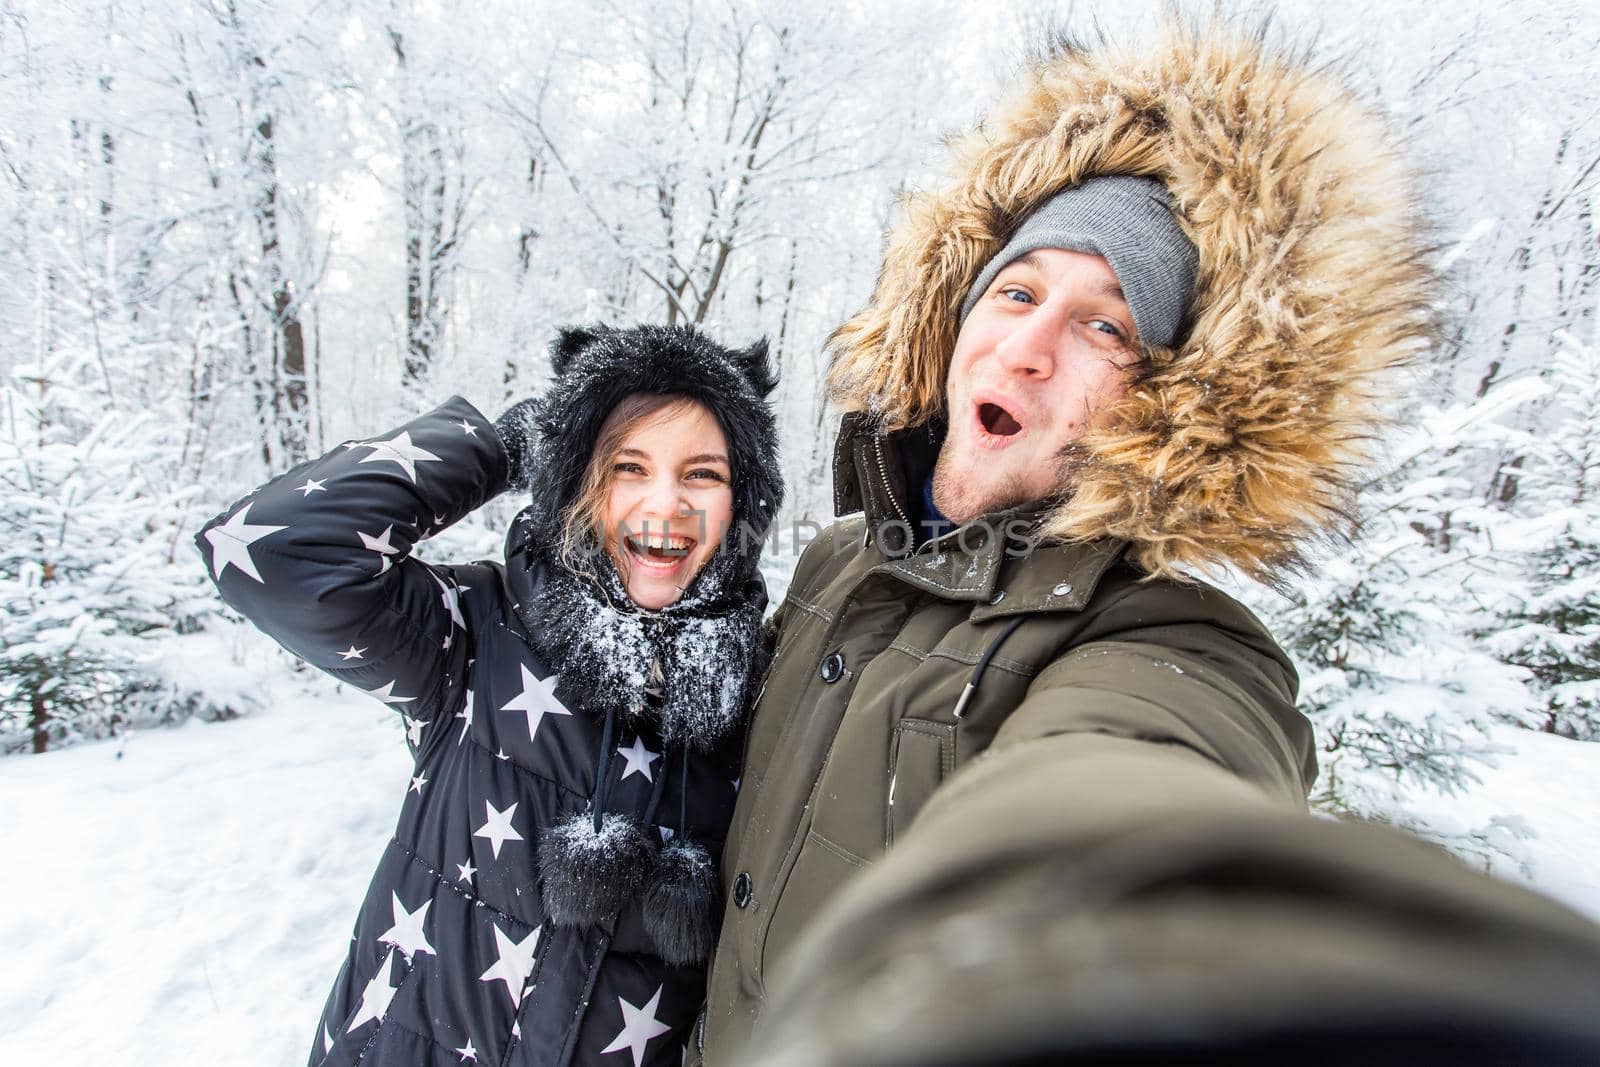 Season and relationship concept - Funny couple taking selfie in the winter time.